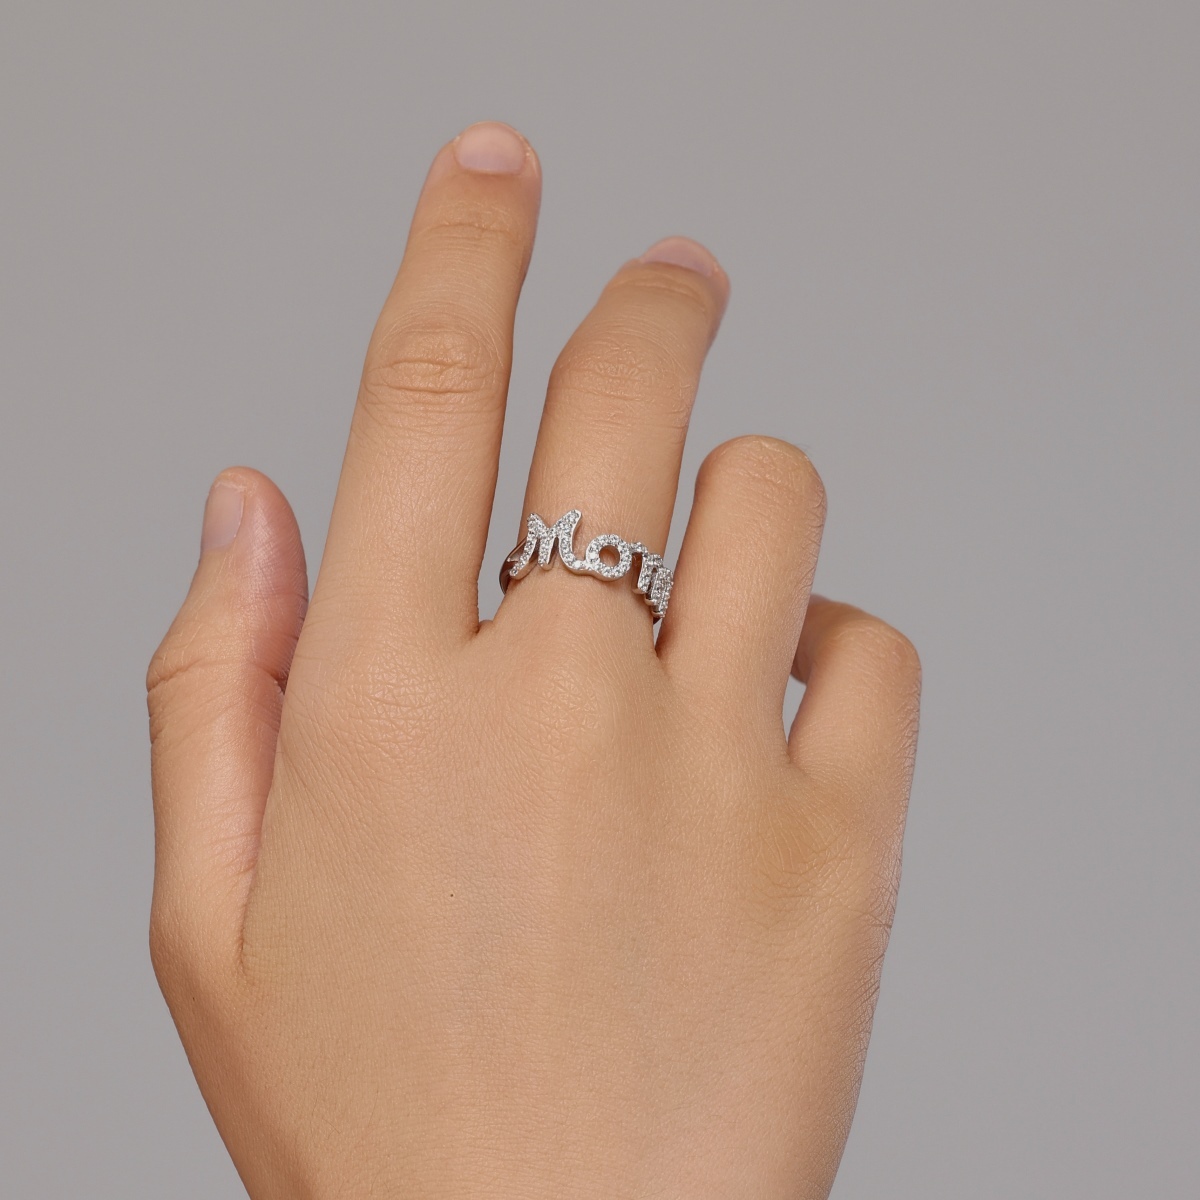 Mom Pave Sterling Silver Ring